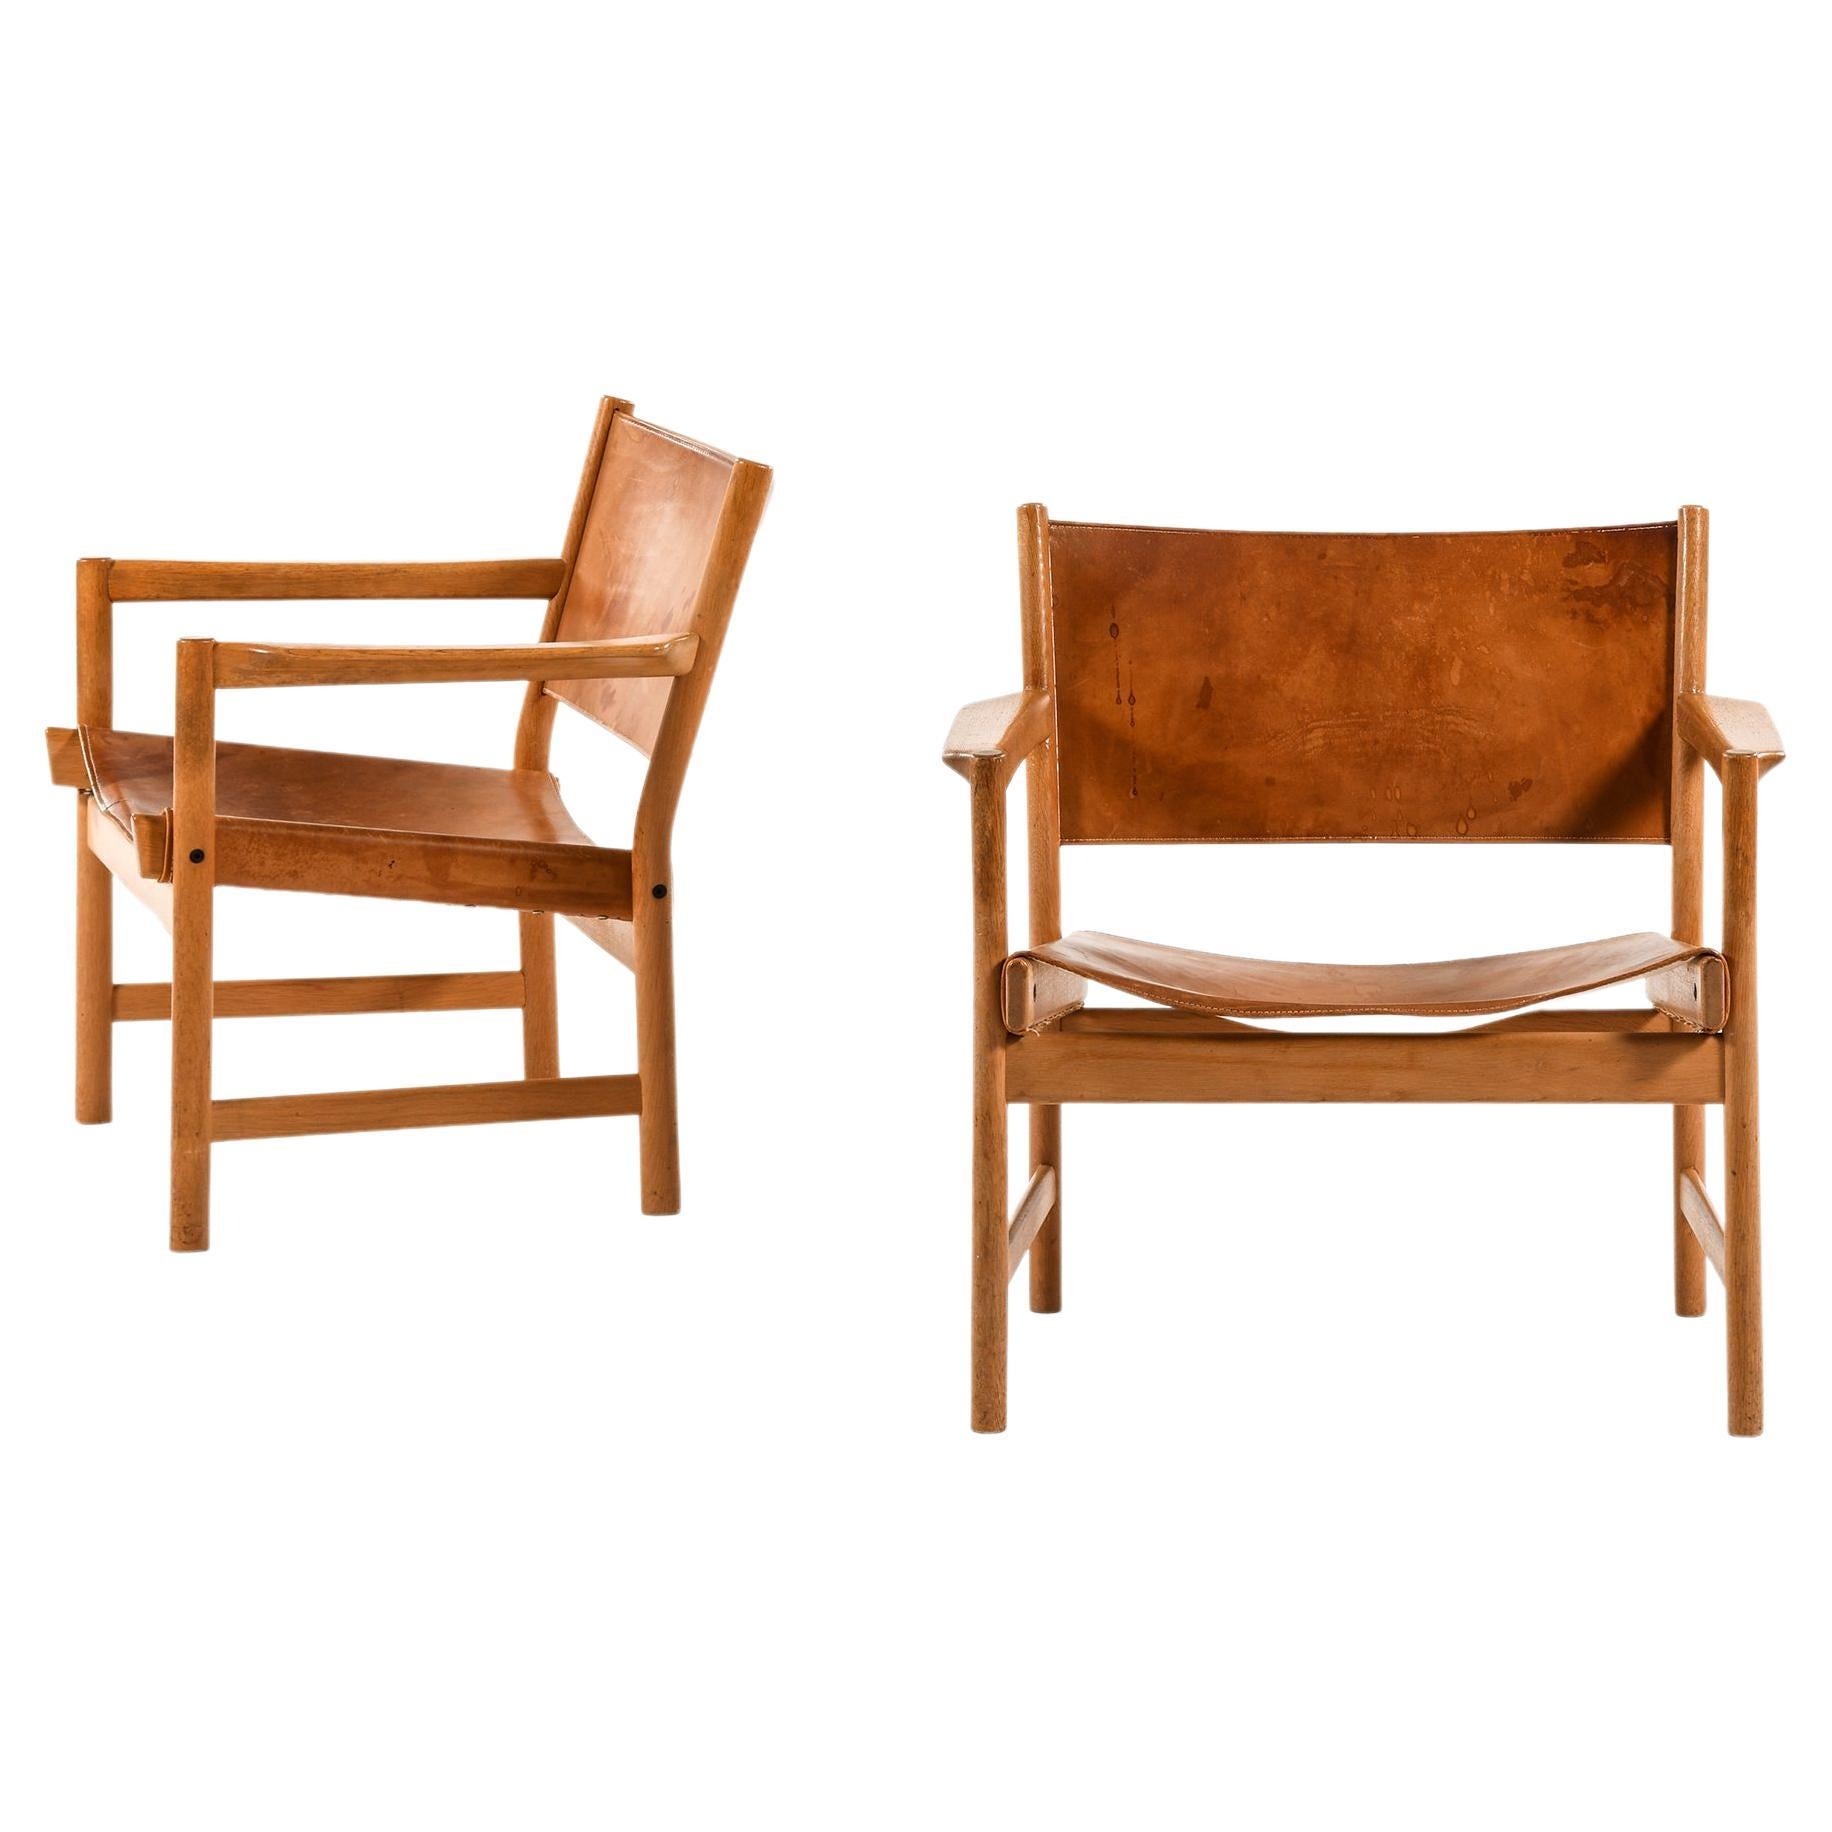 Rare Pair of Easy Chairs in Oak and Leather by Alf Svensson, 1960's For Sale